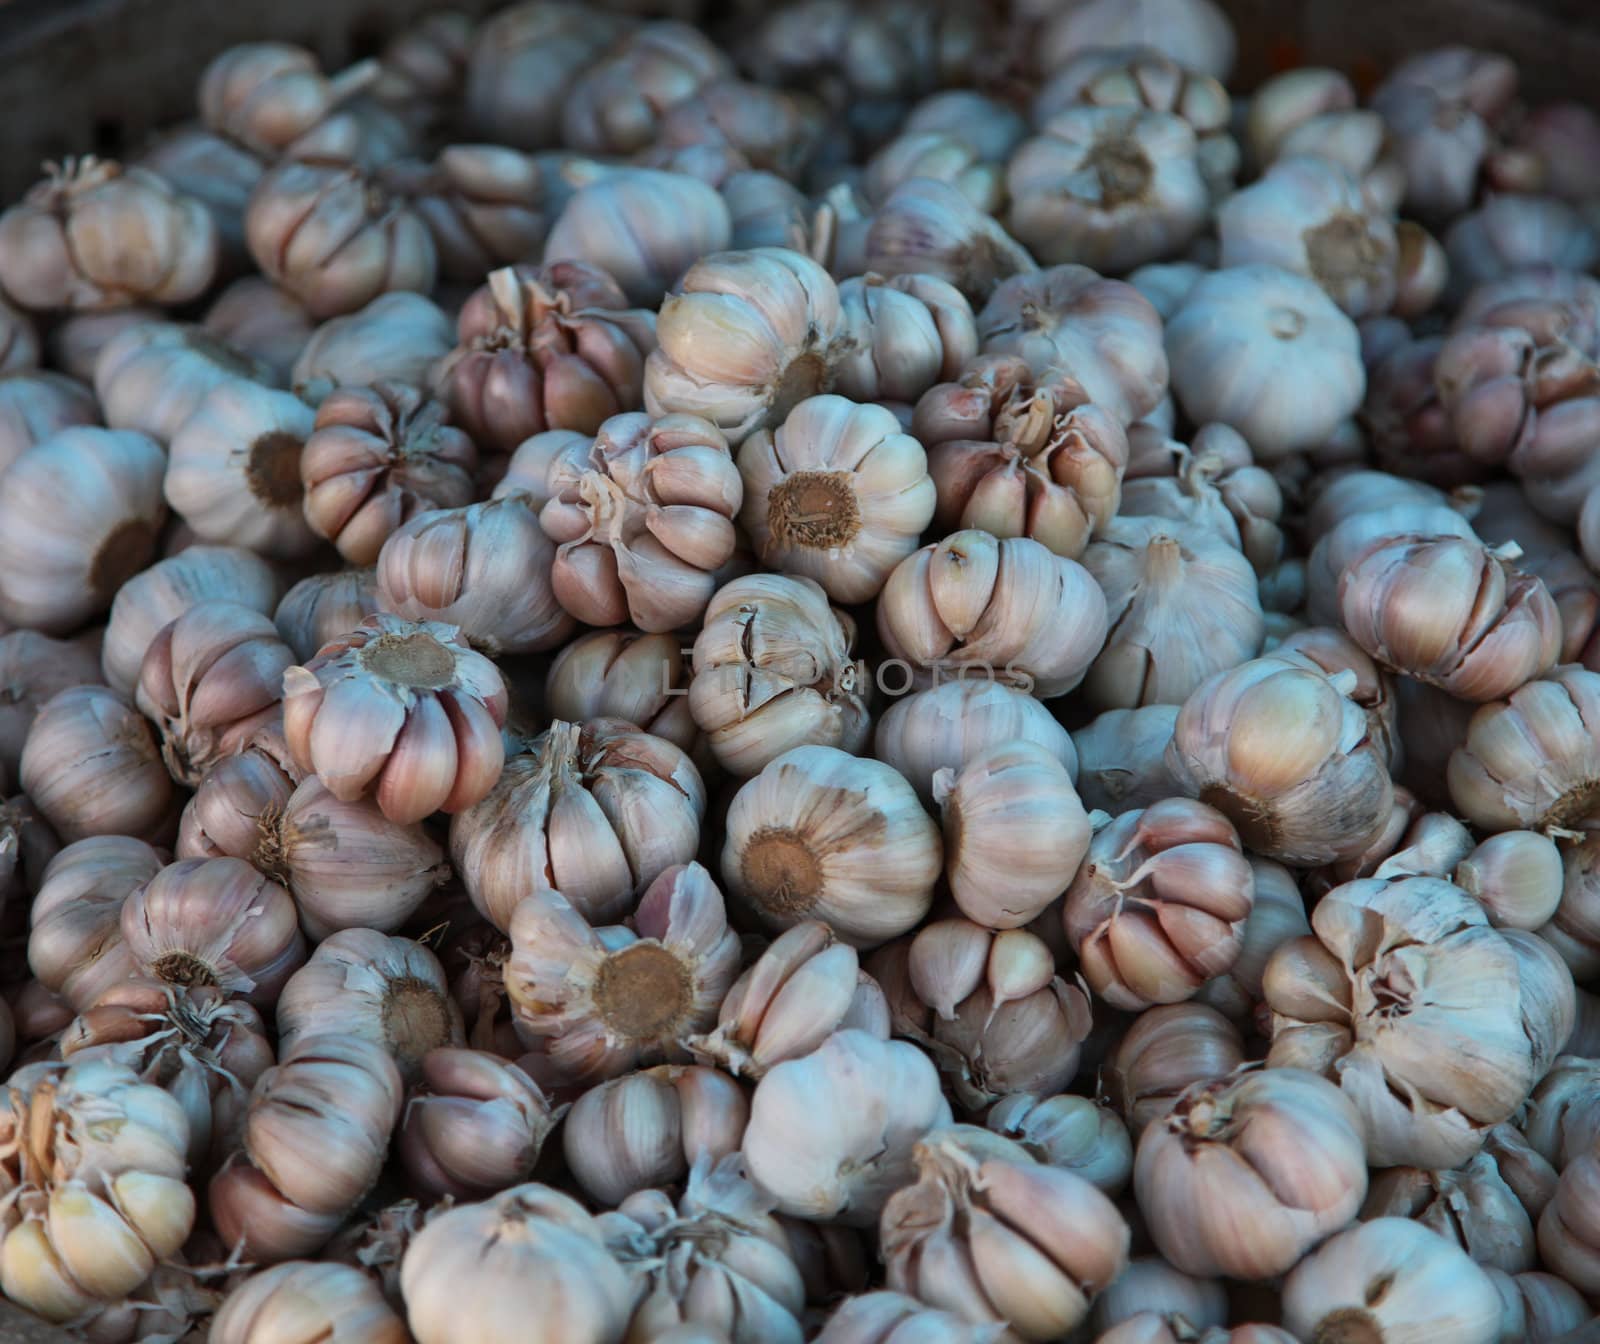 Ripe Garlic Stock On The Market by nfx702